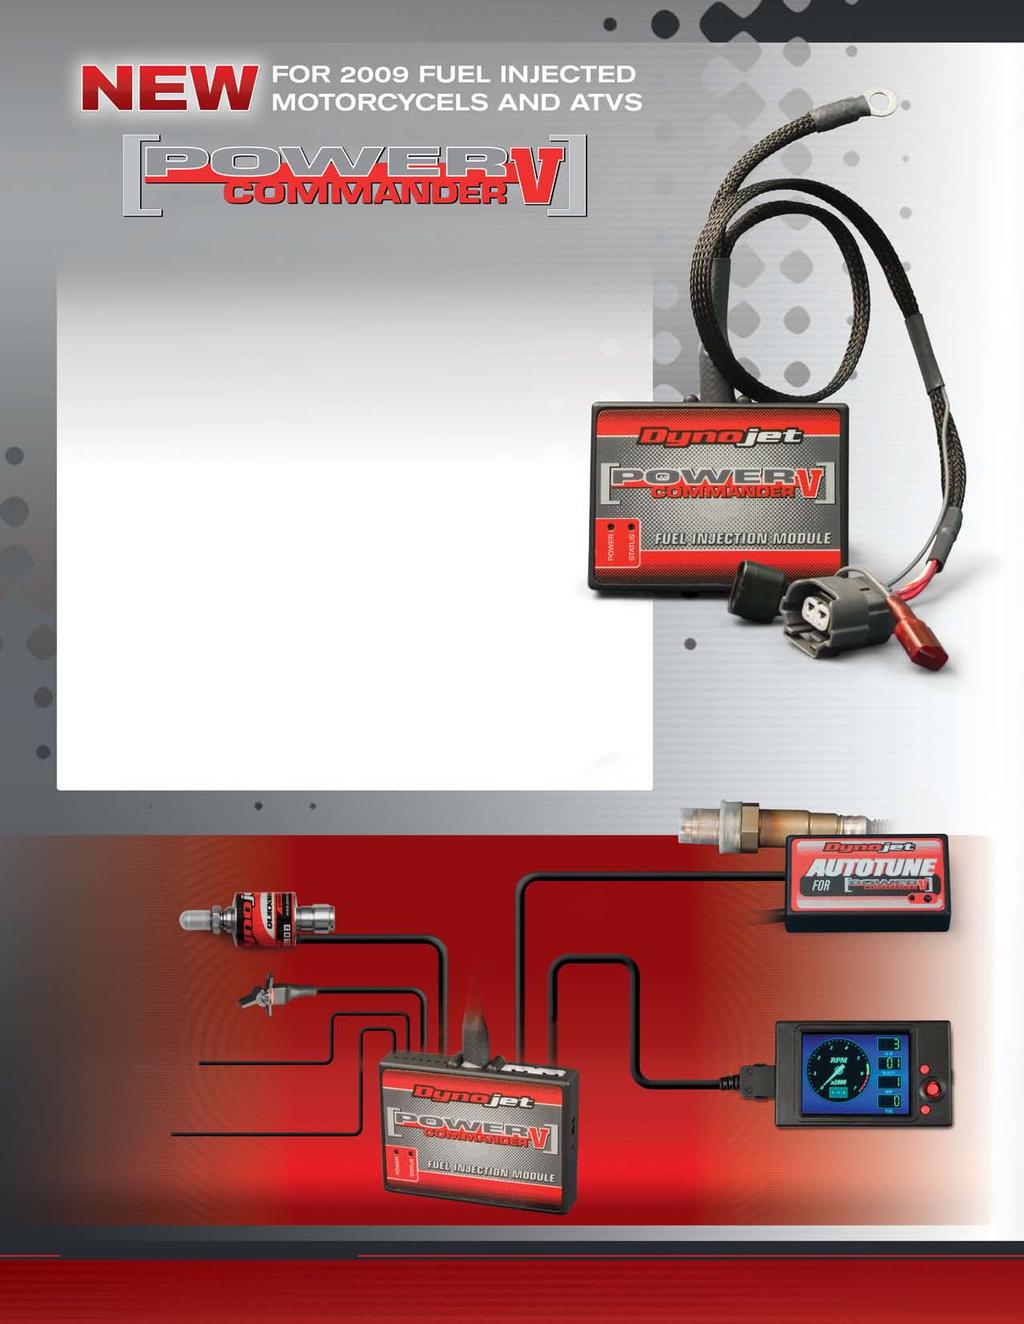 THE NEXT STAGE IN FUEL INJECTION CONTROL FEATURES REDUCED SIZE (less than half of the size of PCIII) USB POWERED FROM COMPUTER (9 volt adapter is no longer needed for programming) 2 POSITION MAP